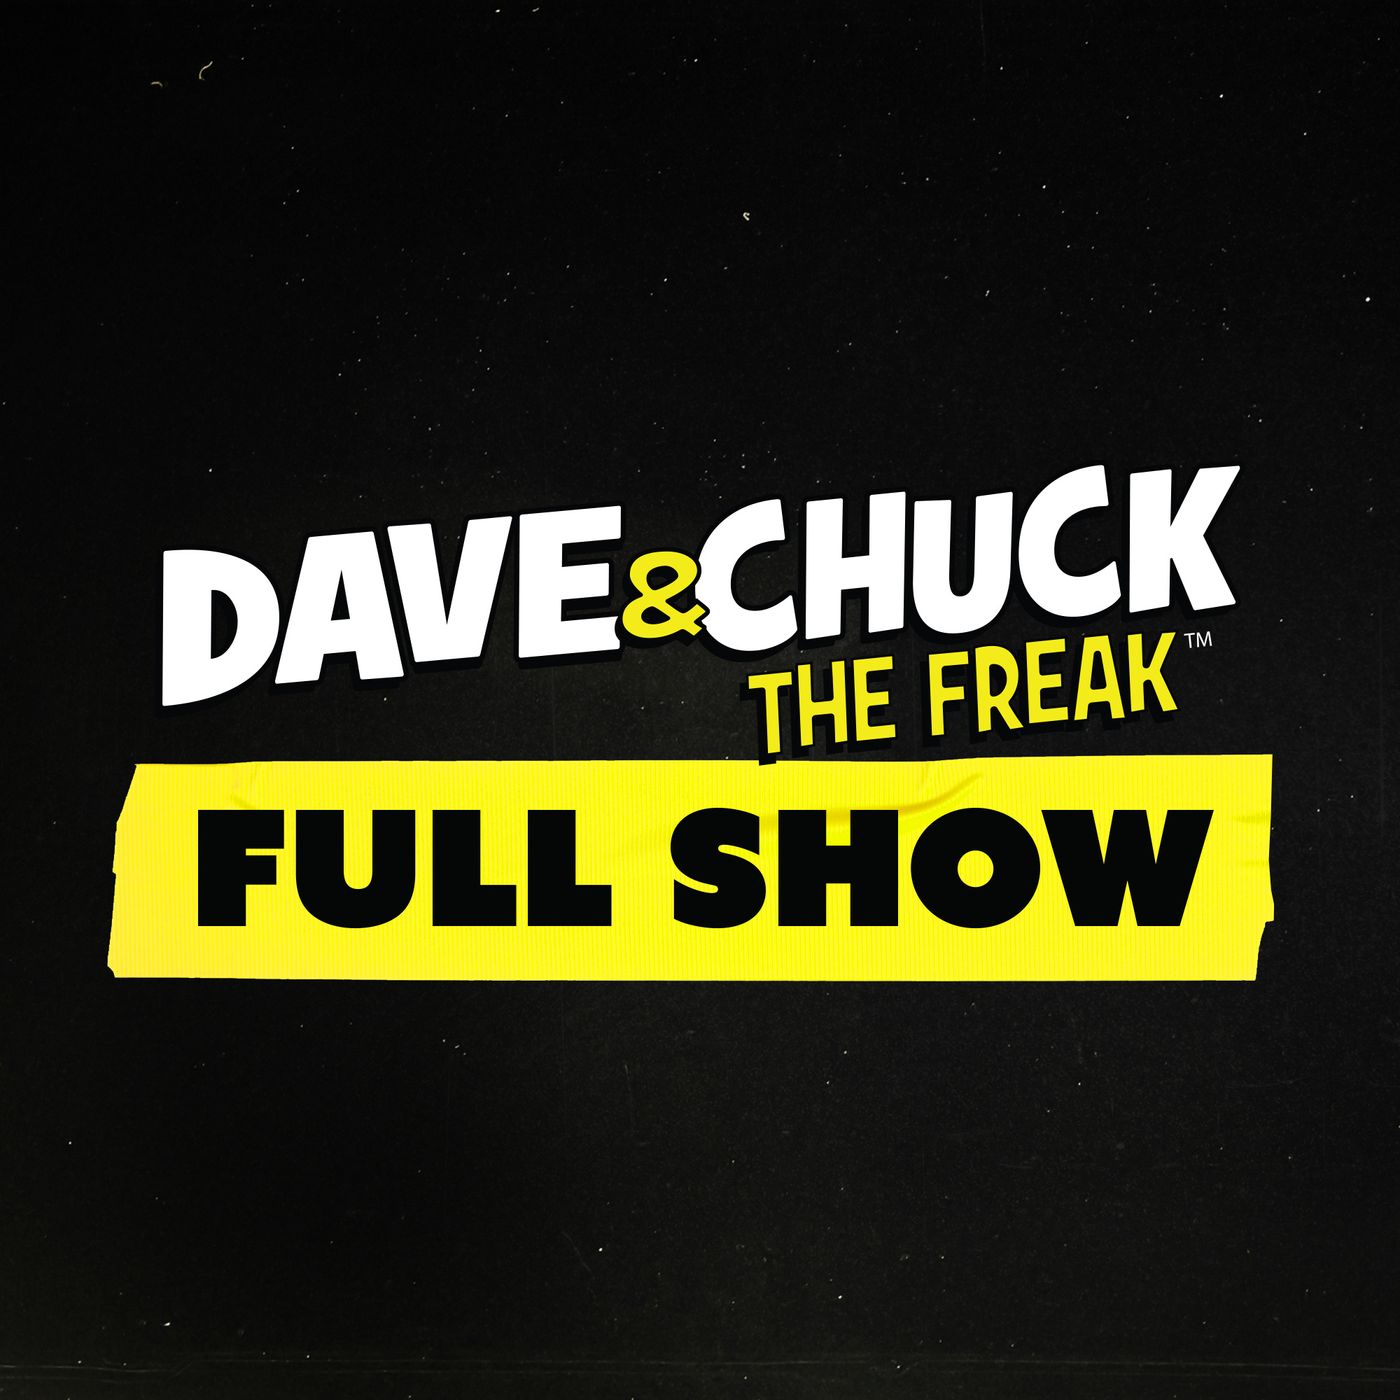 Wednesday, May 31st 2023 Dave & Chuck the Freak Full Show